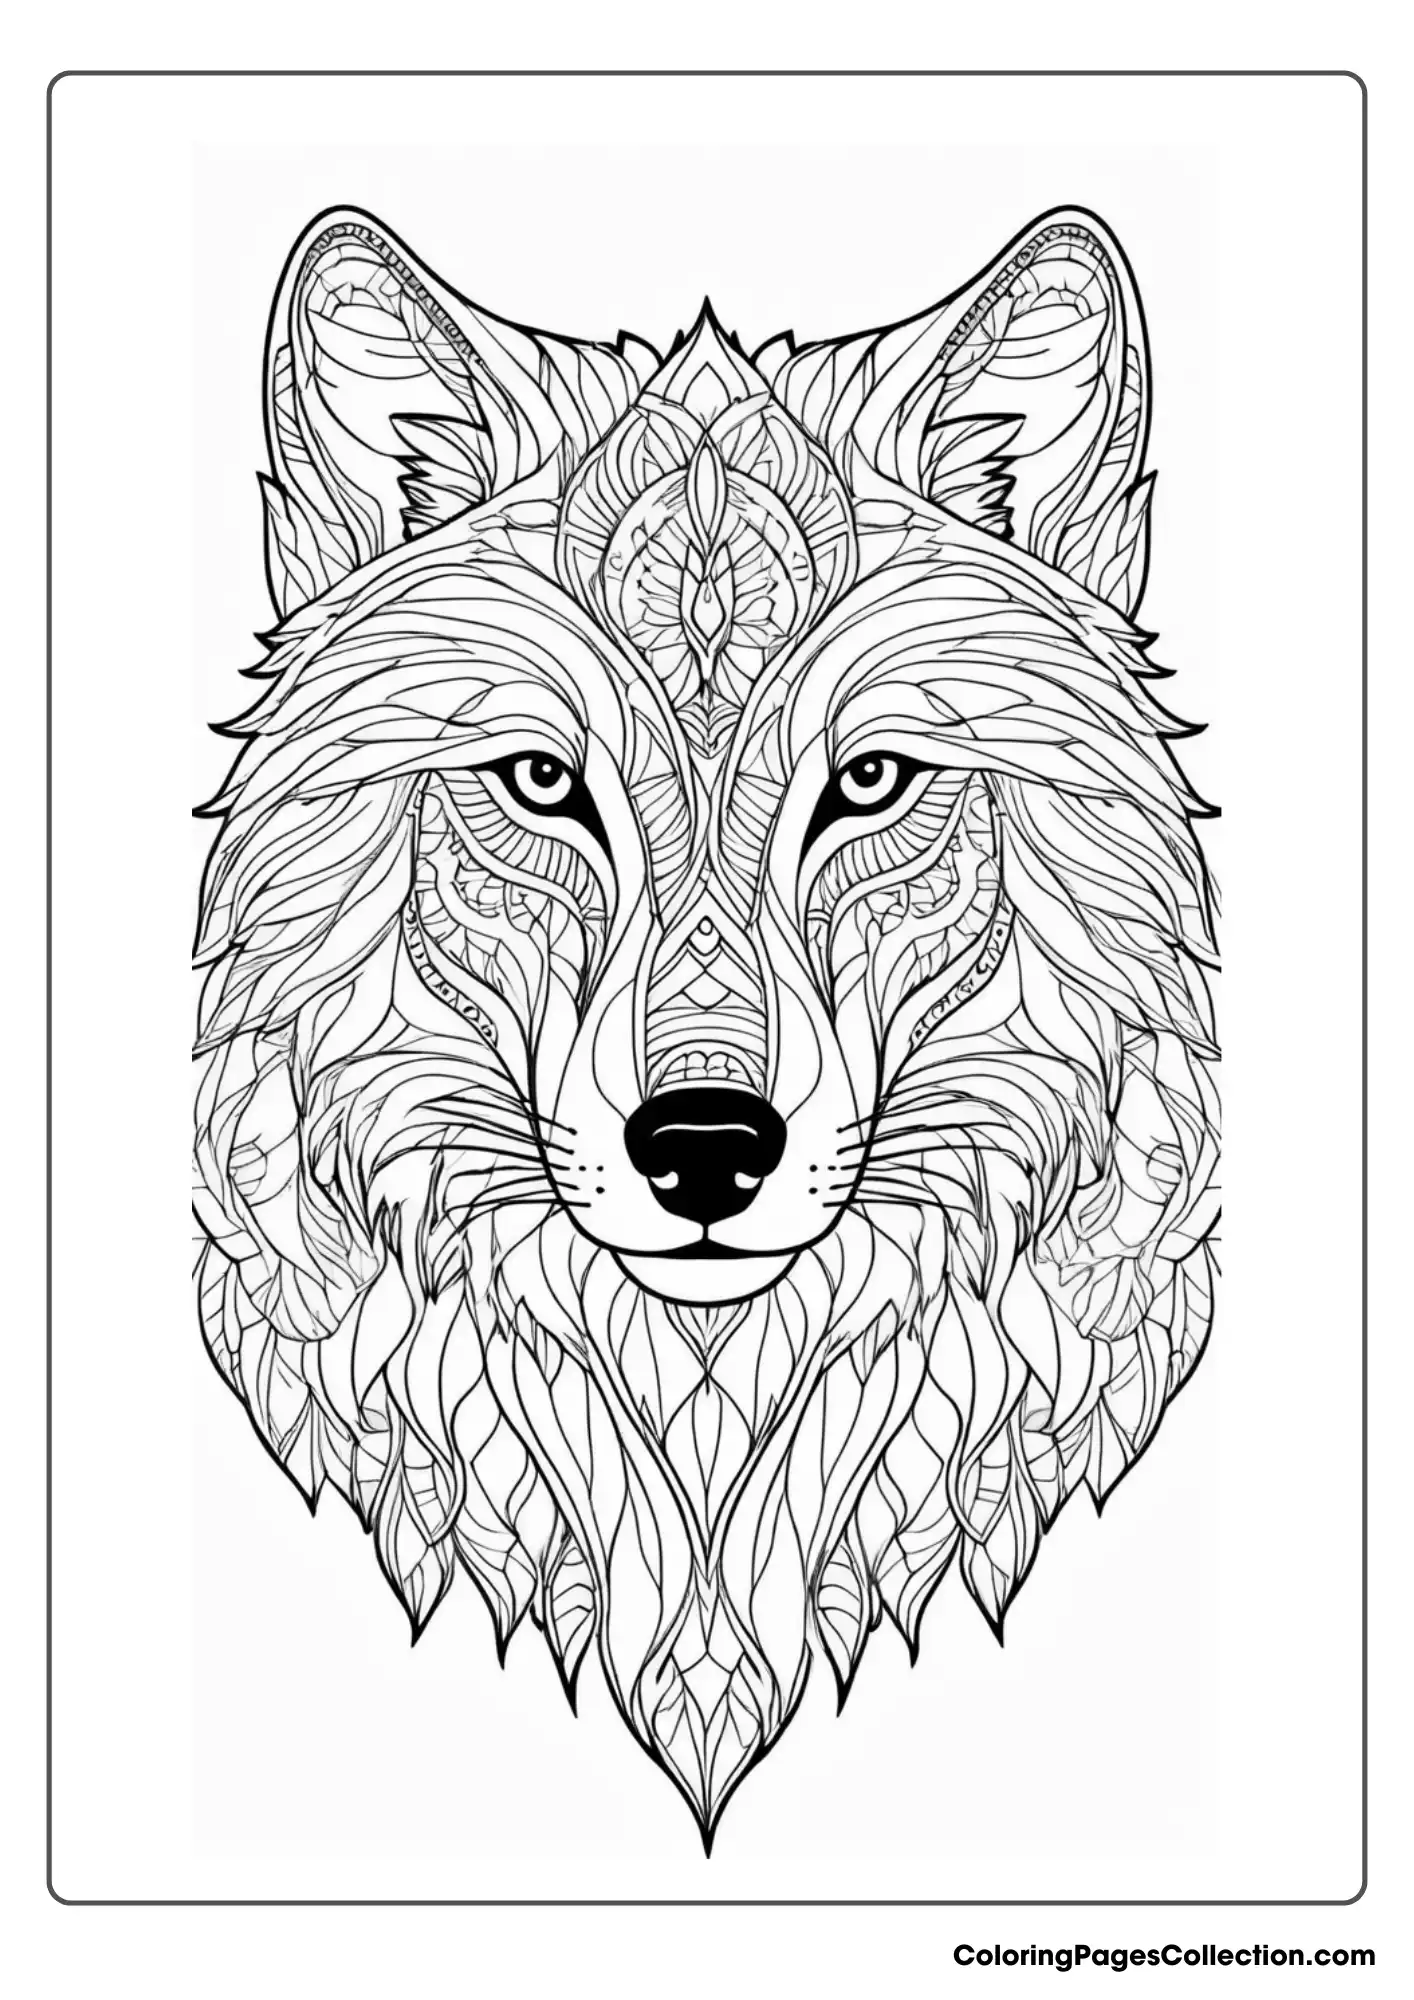 Coloring pages for teens, Mandala Wolf